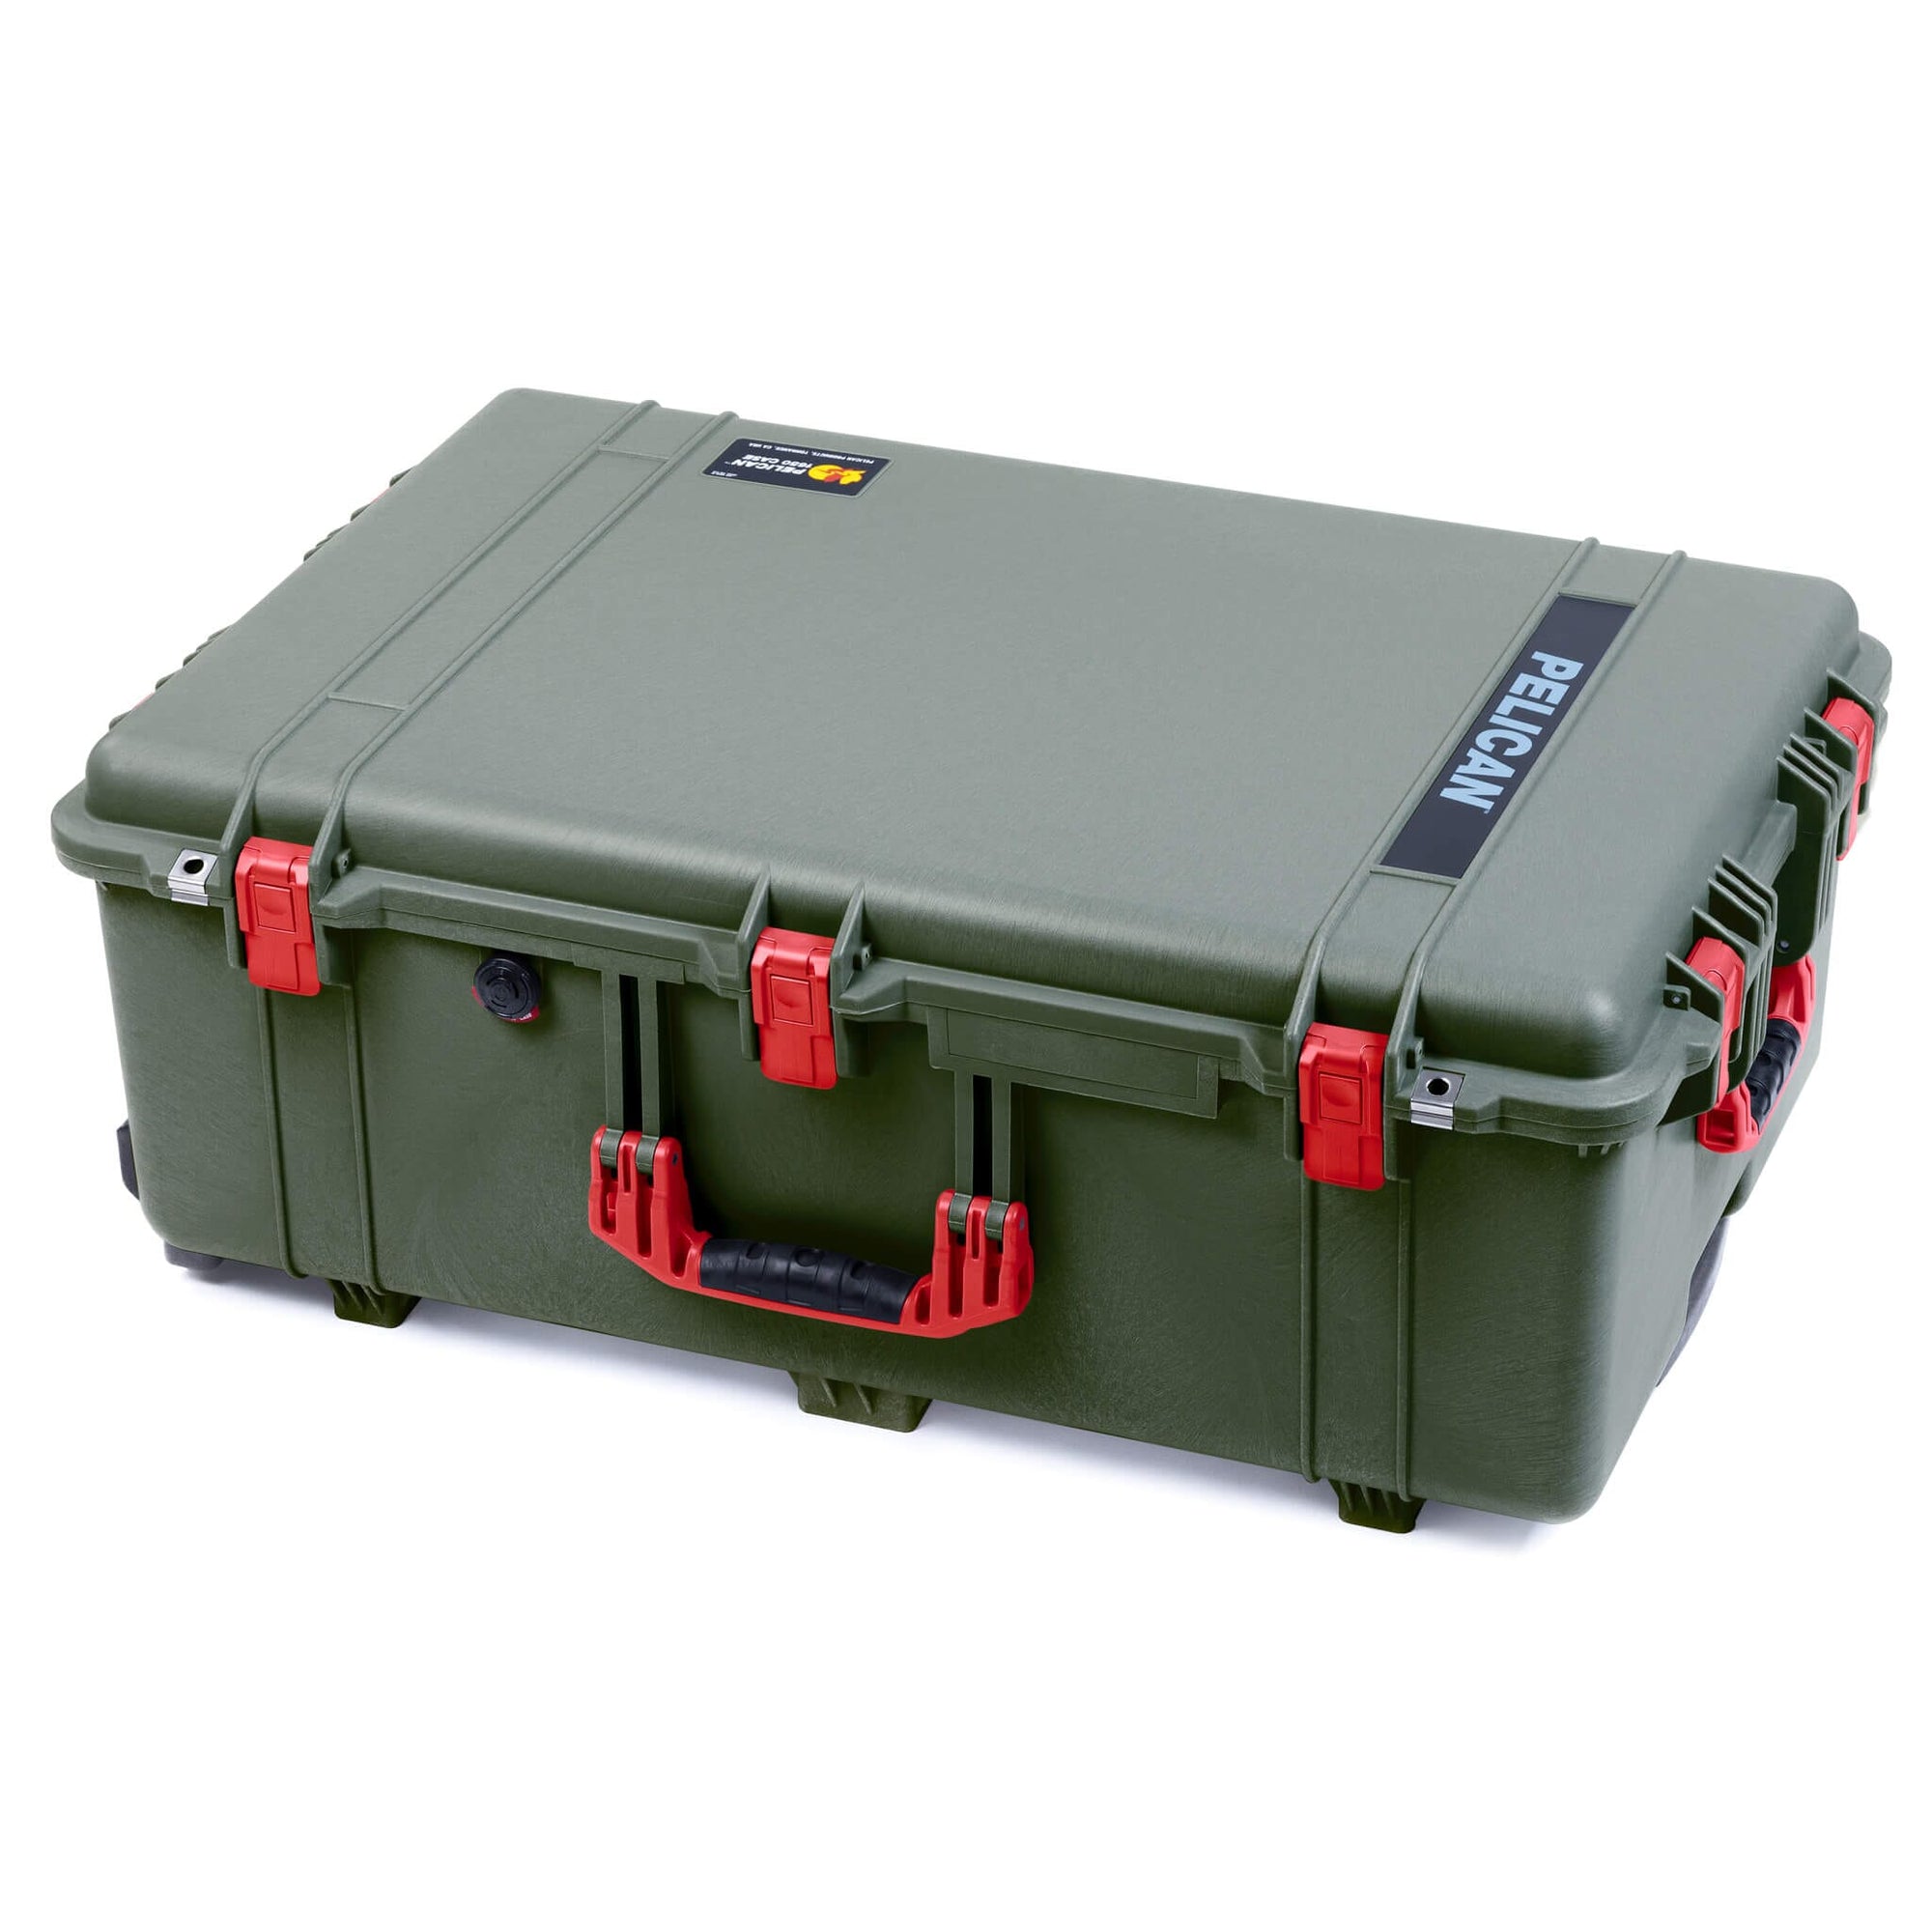 Pelican 1650 Case, OD Green with Red Handles & Push-Button Latches ColorCase 